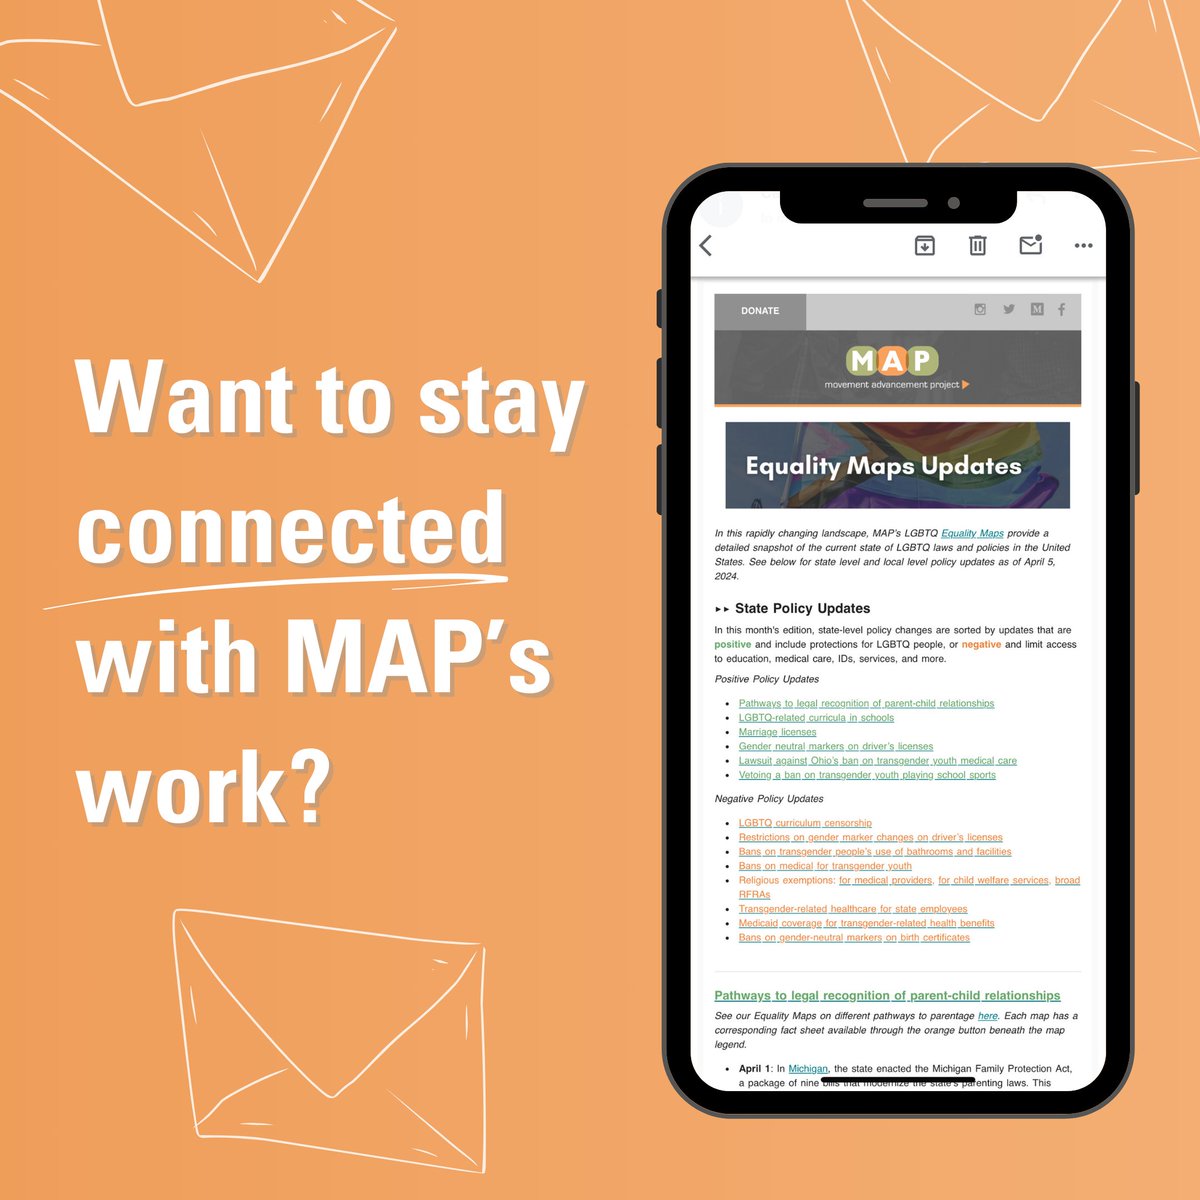 Did you know? MAP regularly provides updates on #LGBTQ #Equality and #Democracy directly to our subscribers. You can get all of MAP's latest policy research, map updates, and more by joining our newsletters today. 🔗📩 Sign up today: bit.ly/map-newsletter